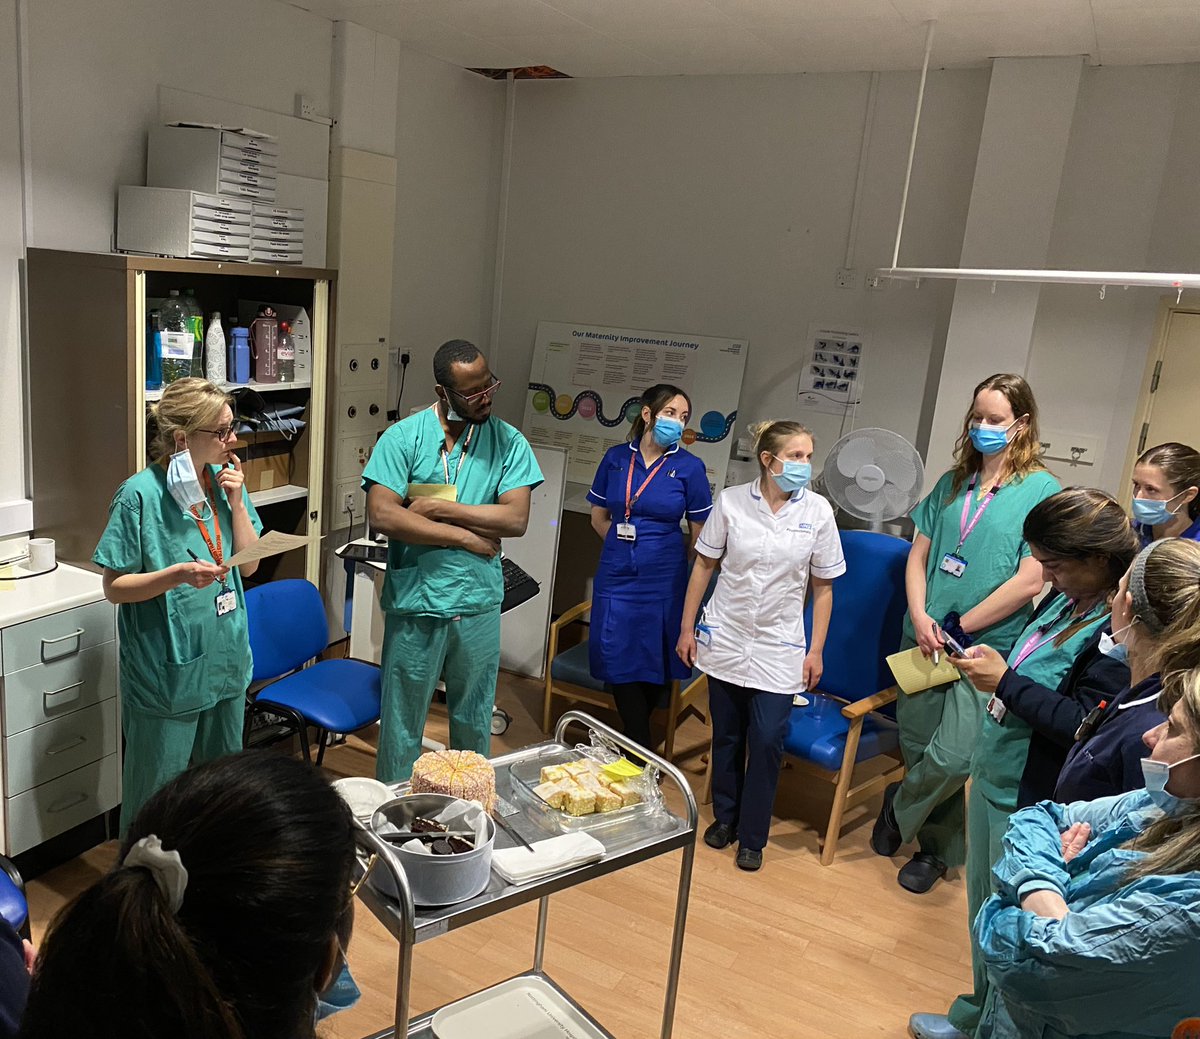 Last night, for the first time, NUH Maternity held a culture evening. 100 Drs, midwives, trainees, executive board members, leaders, HR, admin, paeds, anaesthetists and airline pilots, all in the same room, focused on change. 1 big team of the shift. 🤞 the first of many